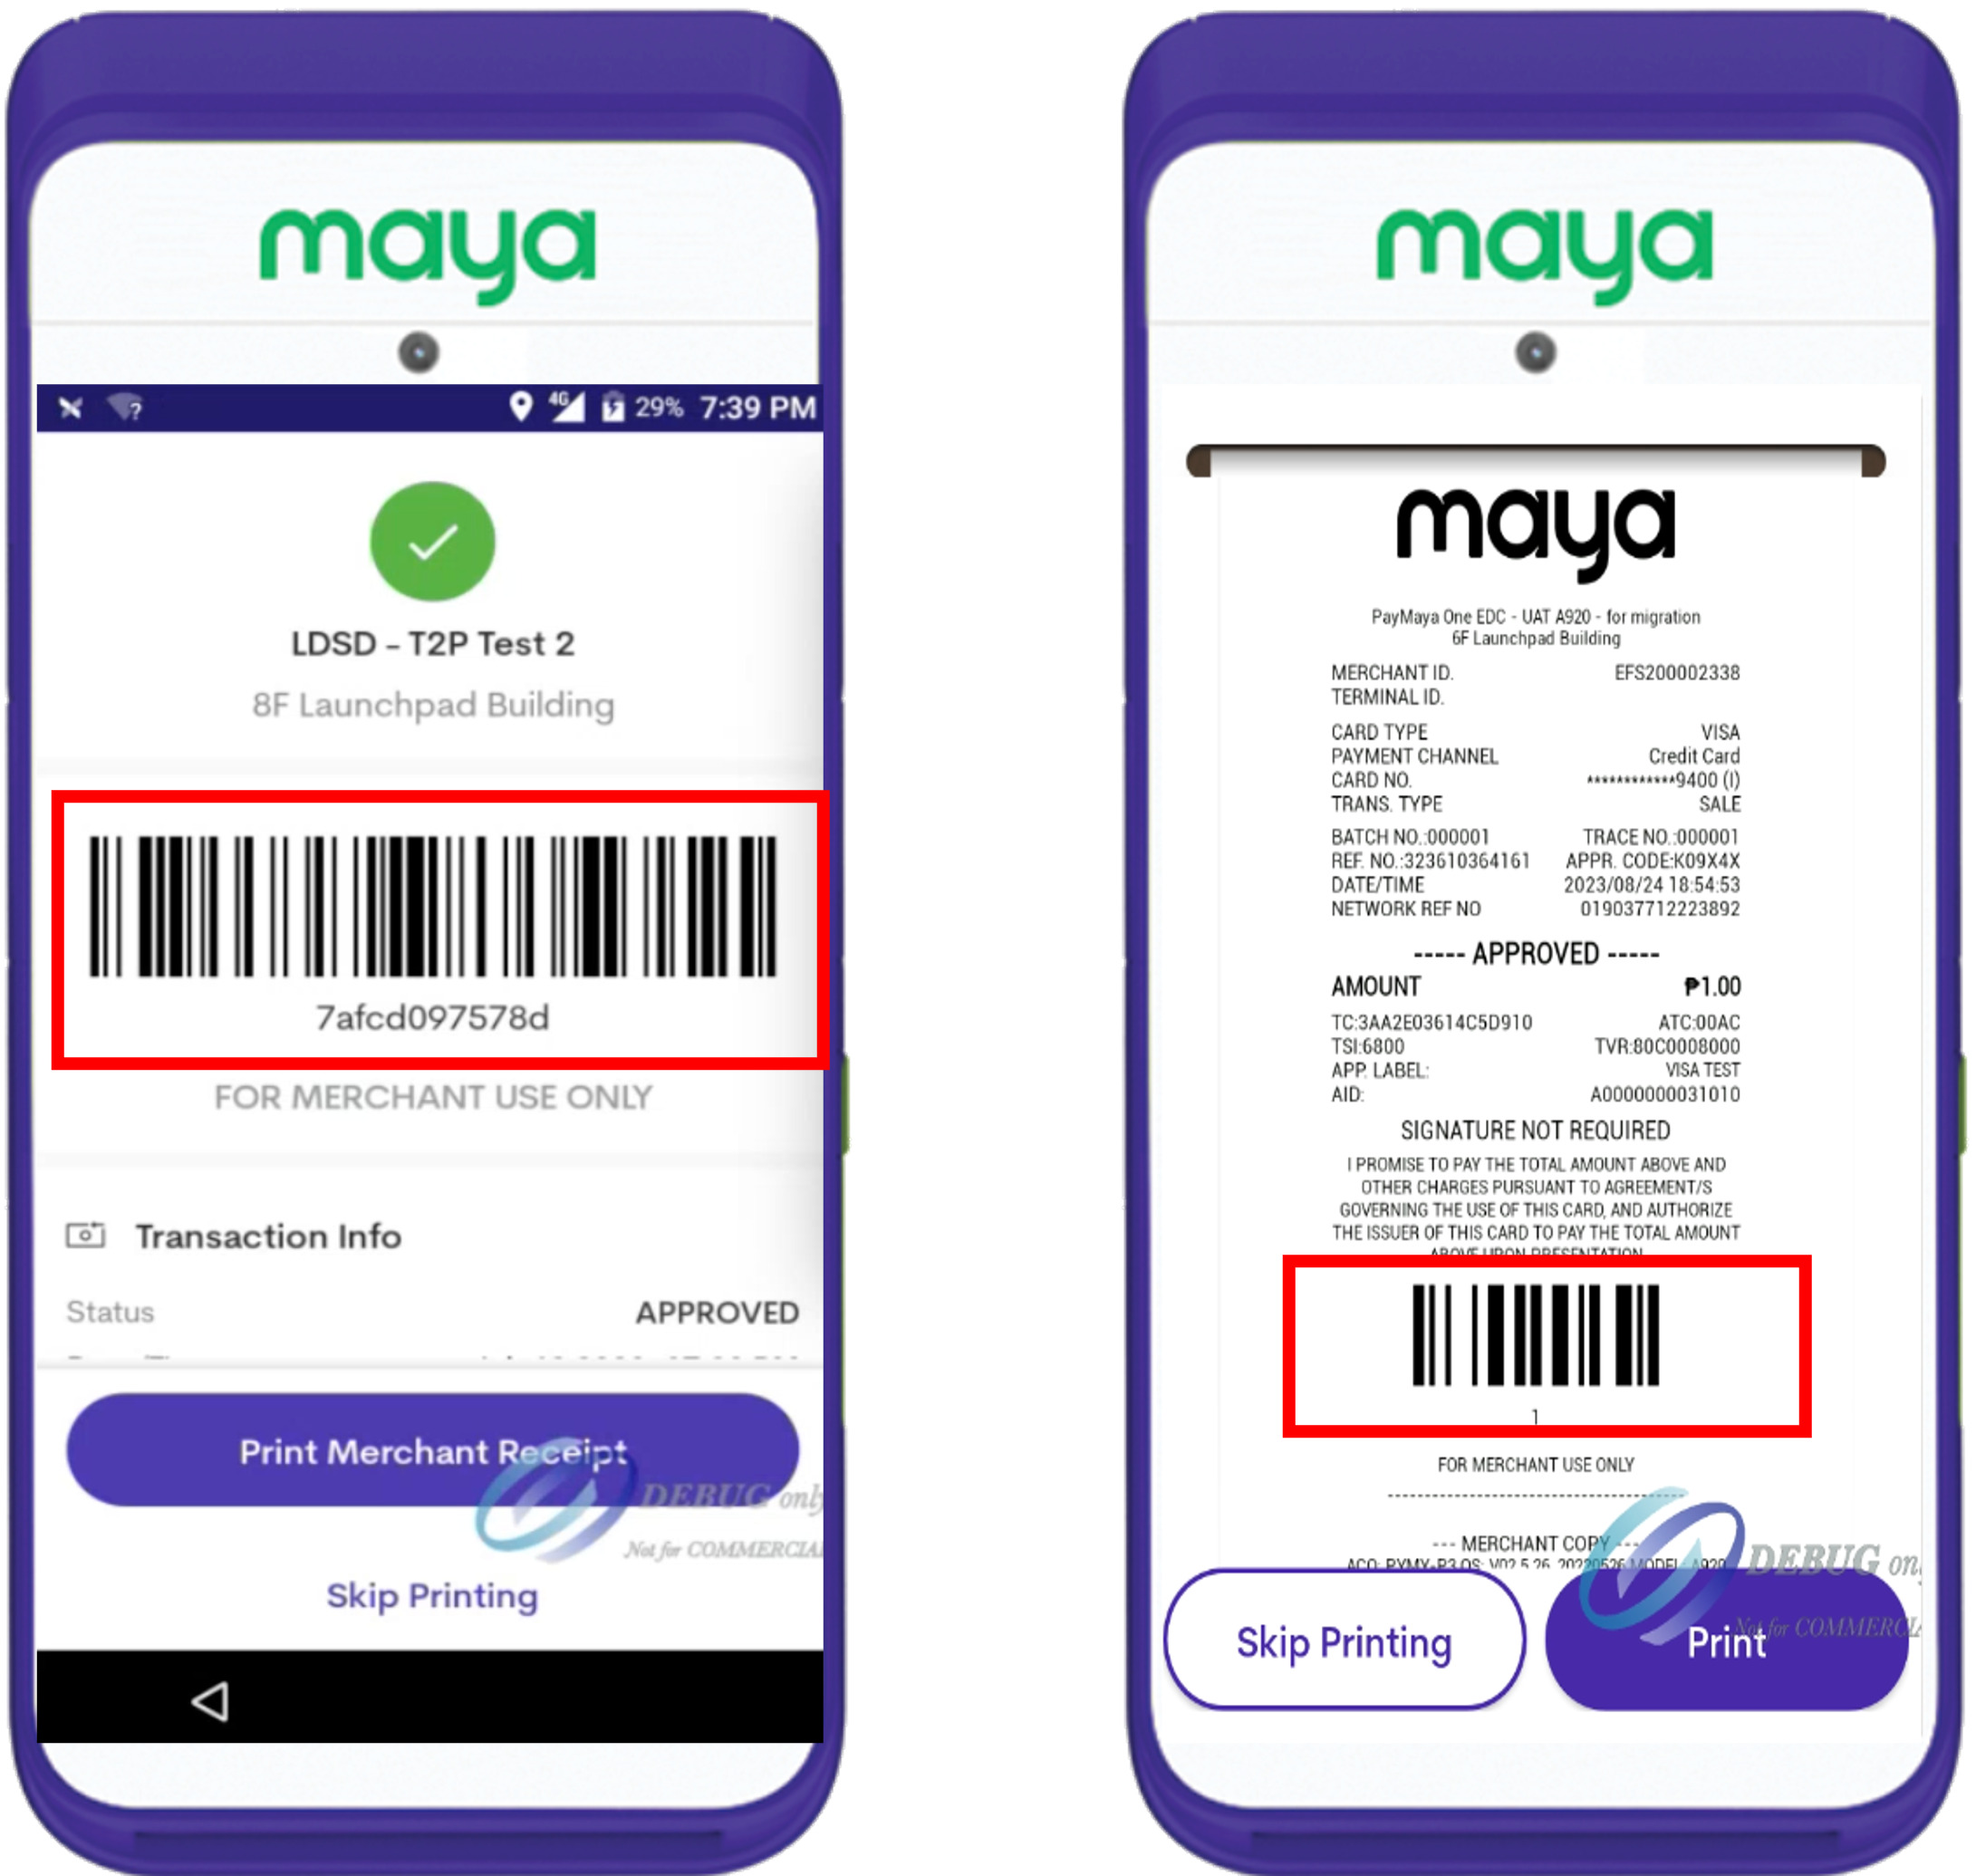 Barcode on the merchant receipt via e-wallet (left) and card (right)